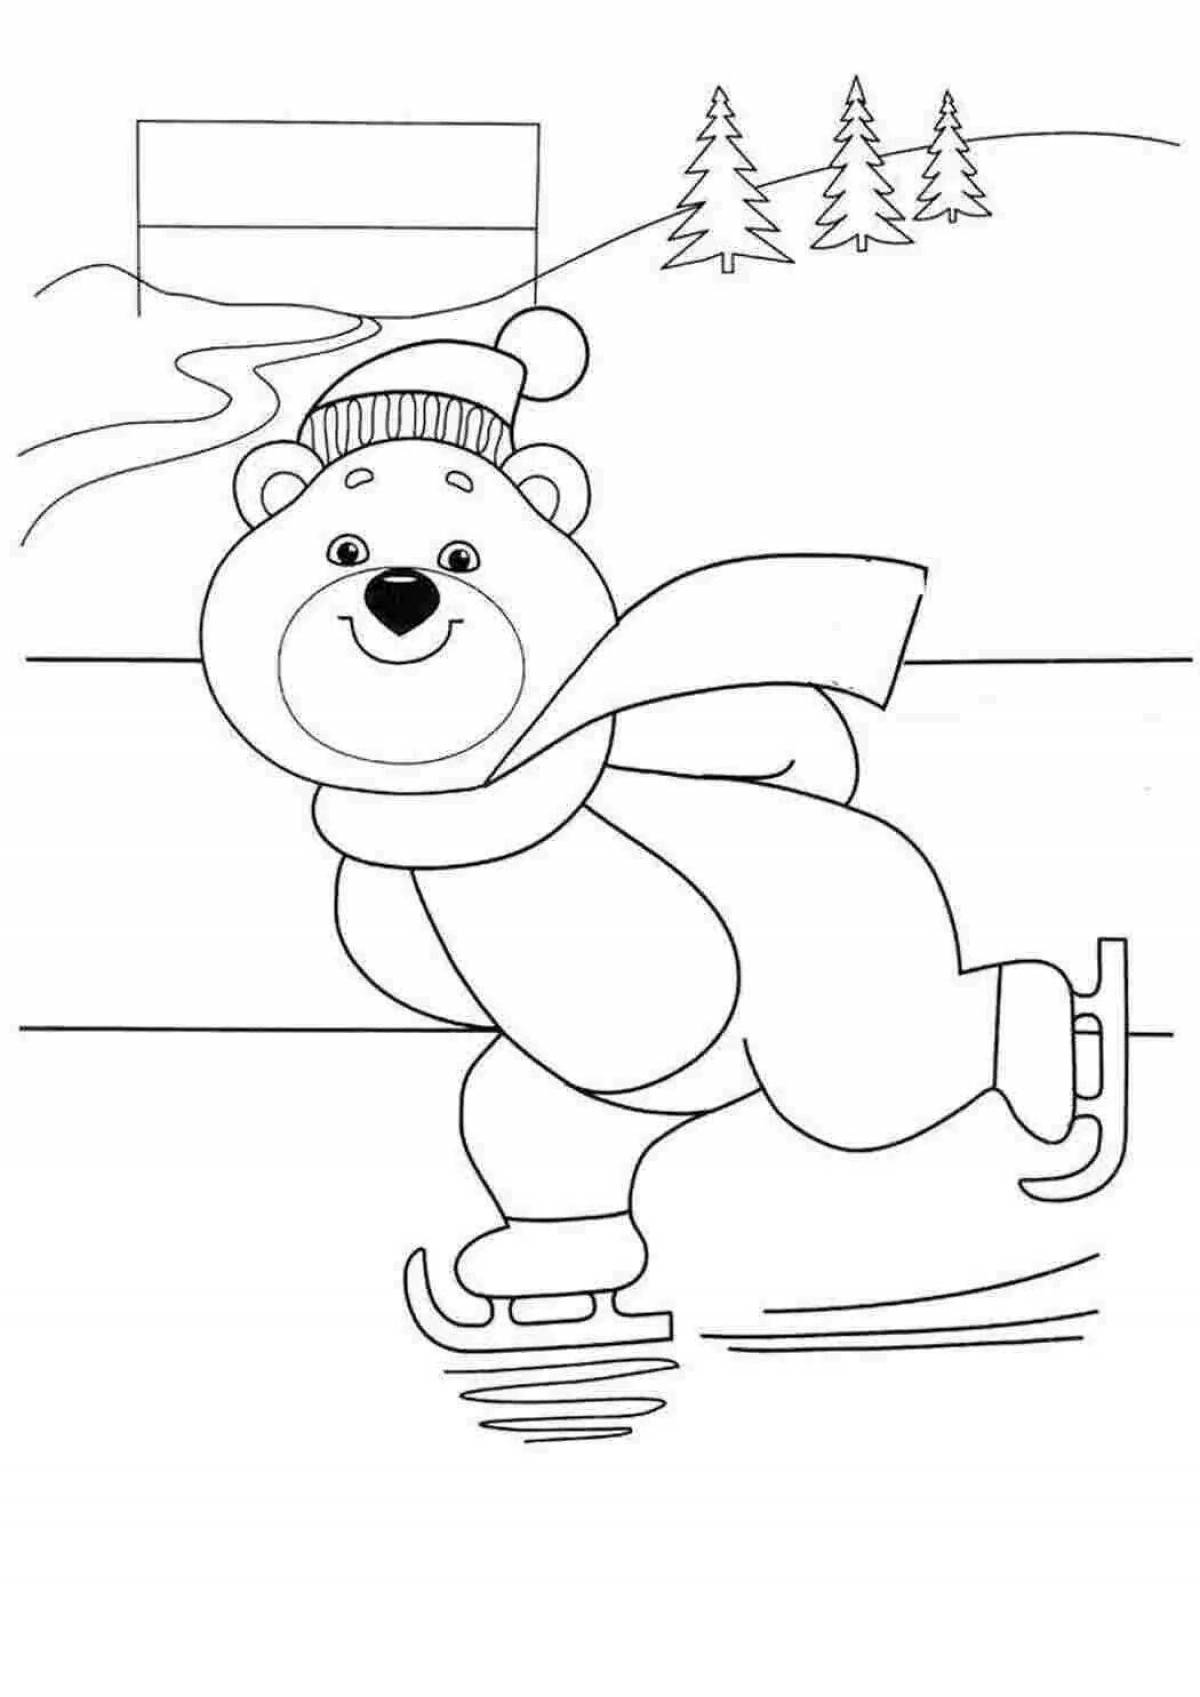 Olympic bear coloring book for children